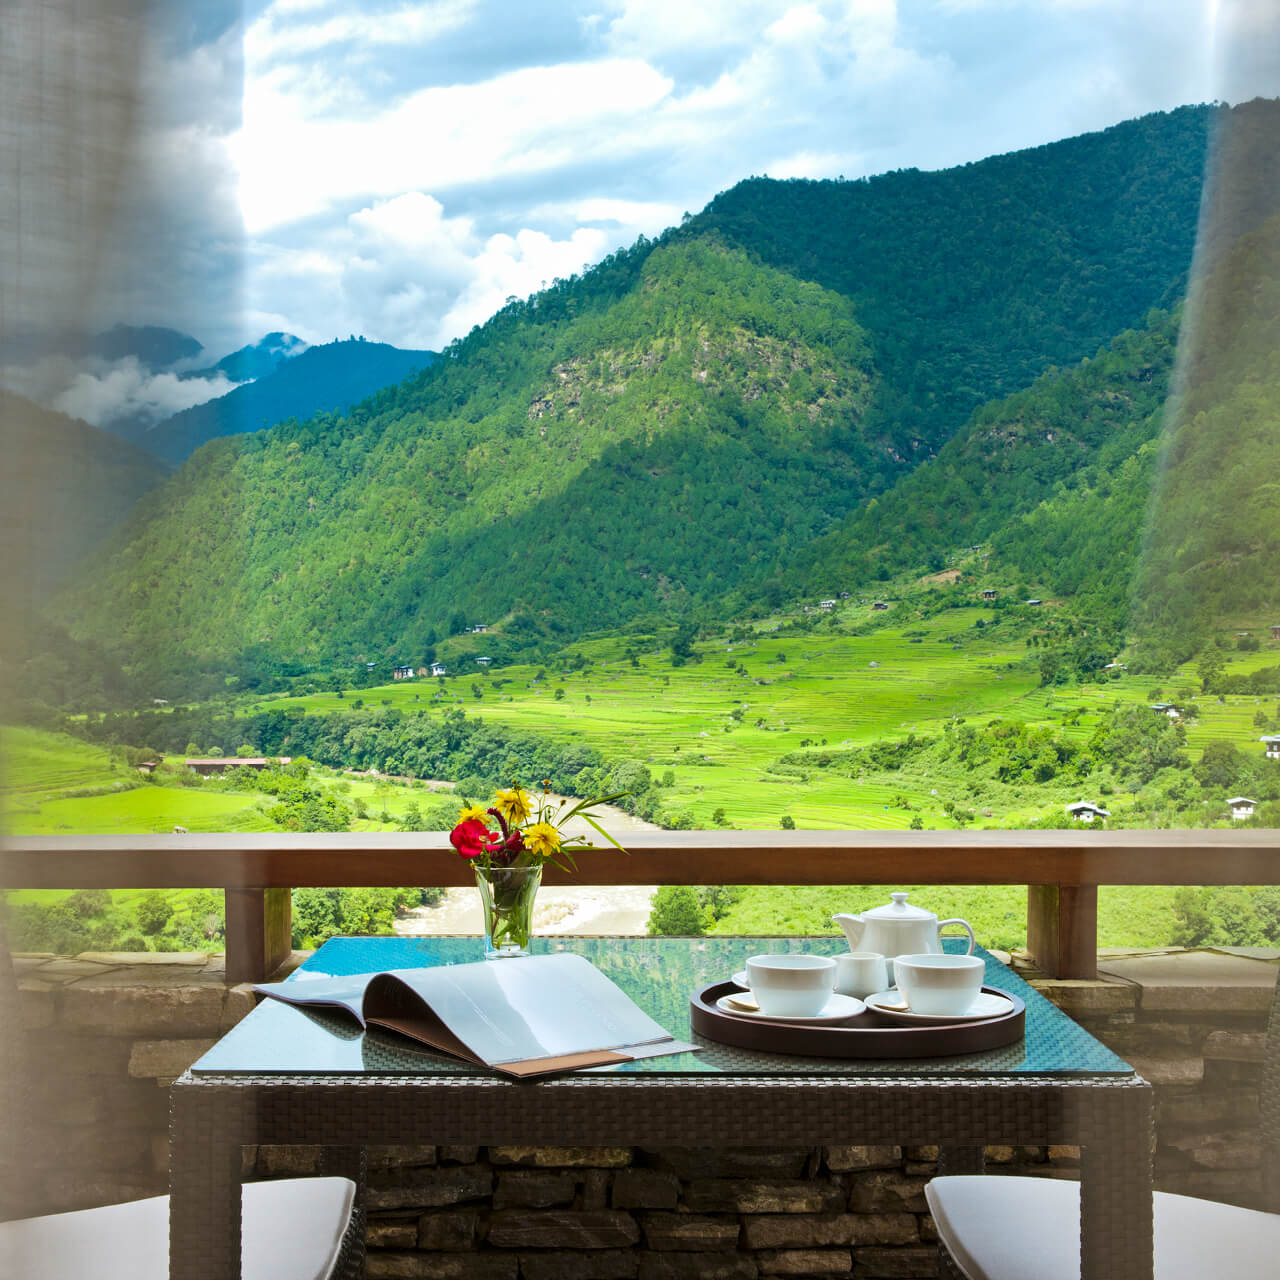 A Table With A Laptop And A Book On It With A Valley In The Background